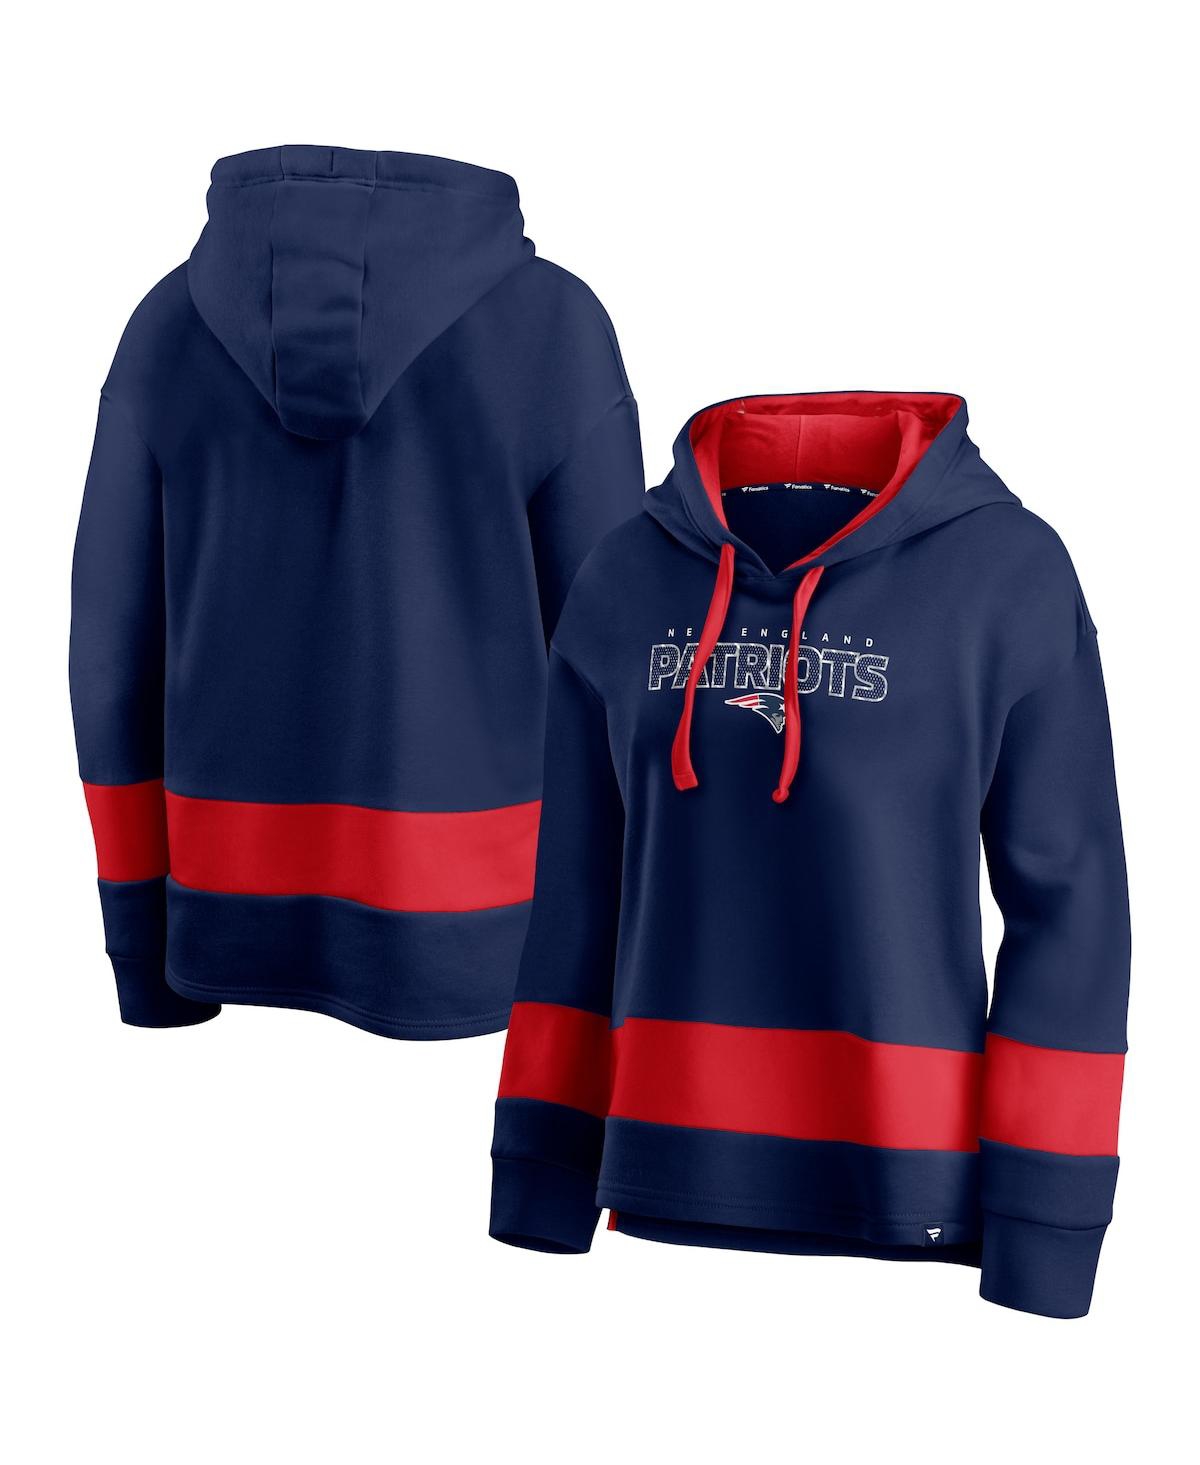 Women's Fanatics Navy and Red New England Patriots Colors of Pride Colorblock Pullover Hoodie - Navy, Red